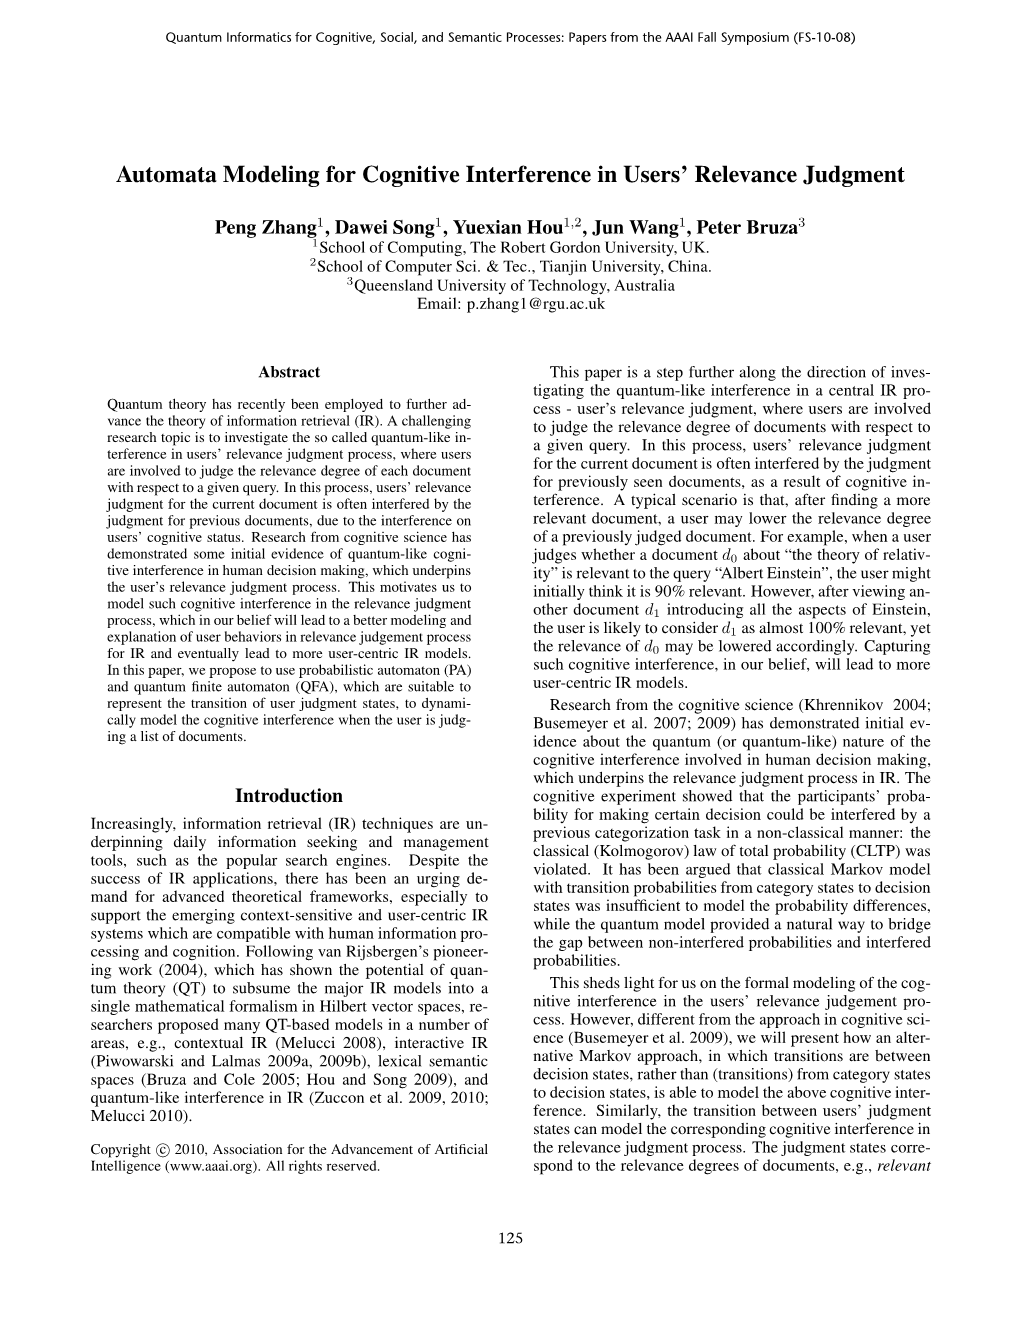 Automata Modeling for Cognitive Interference in Users' Relevance